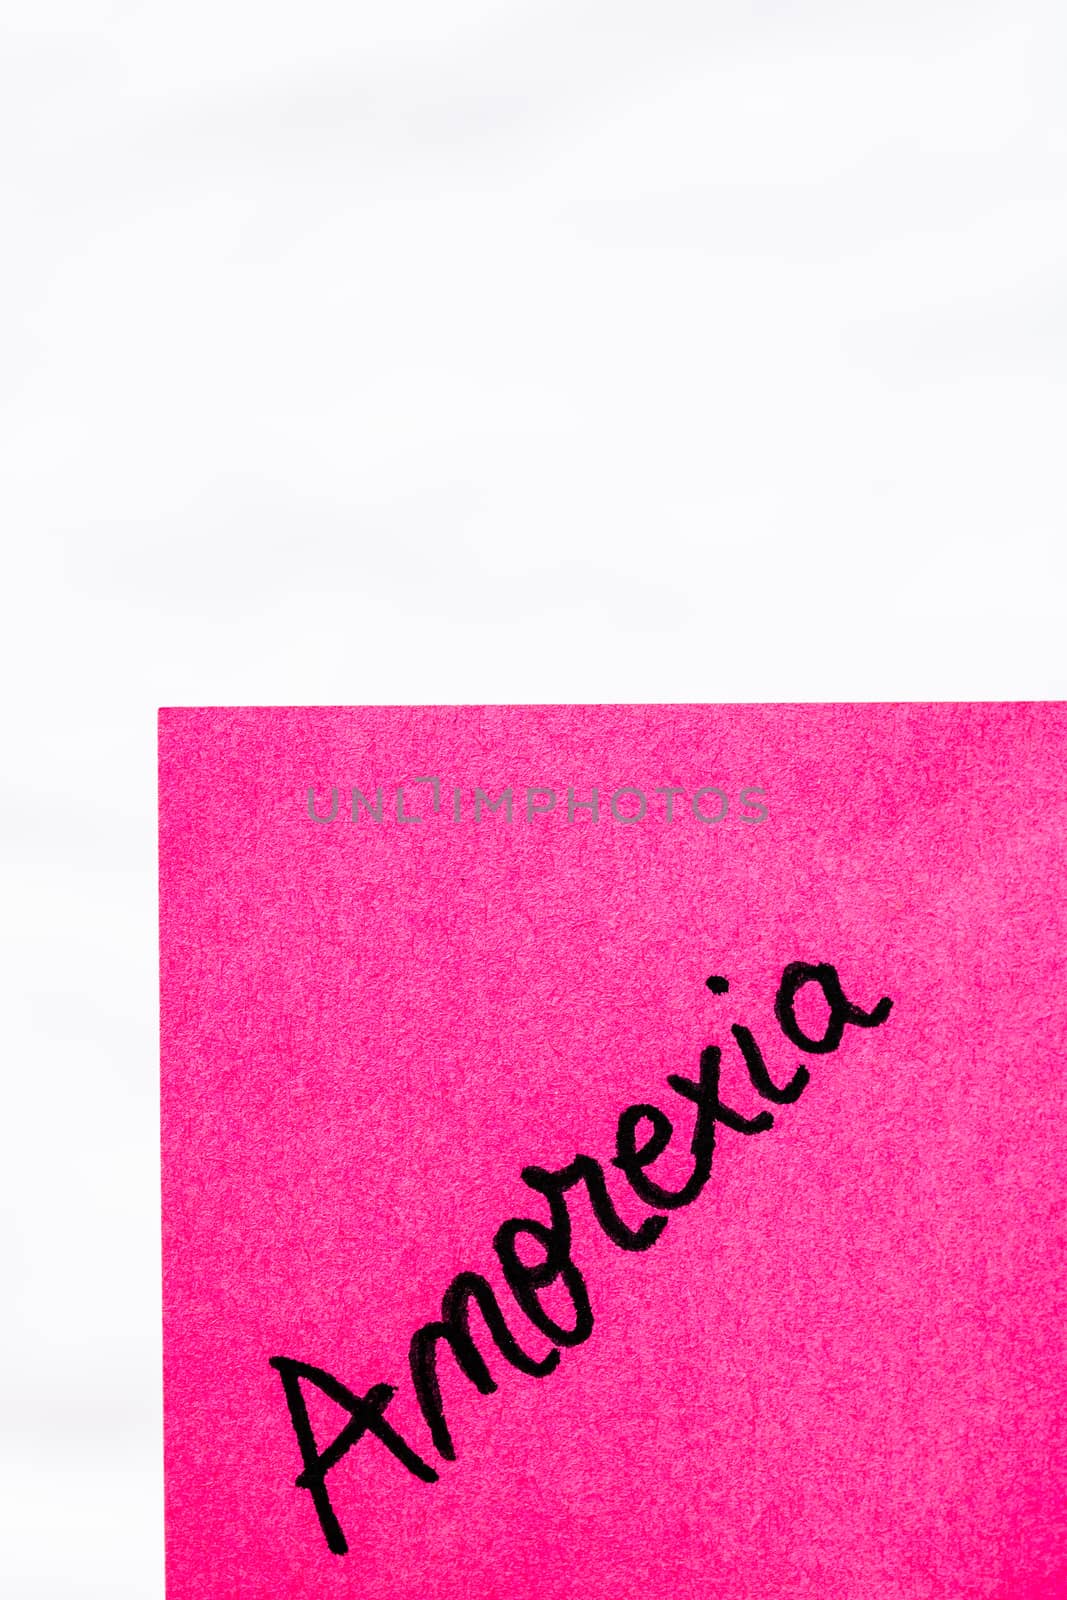 Anorexia handwriting text close up isolated on pink paper with copy space. Writing text on memo post reminder